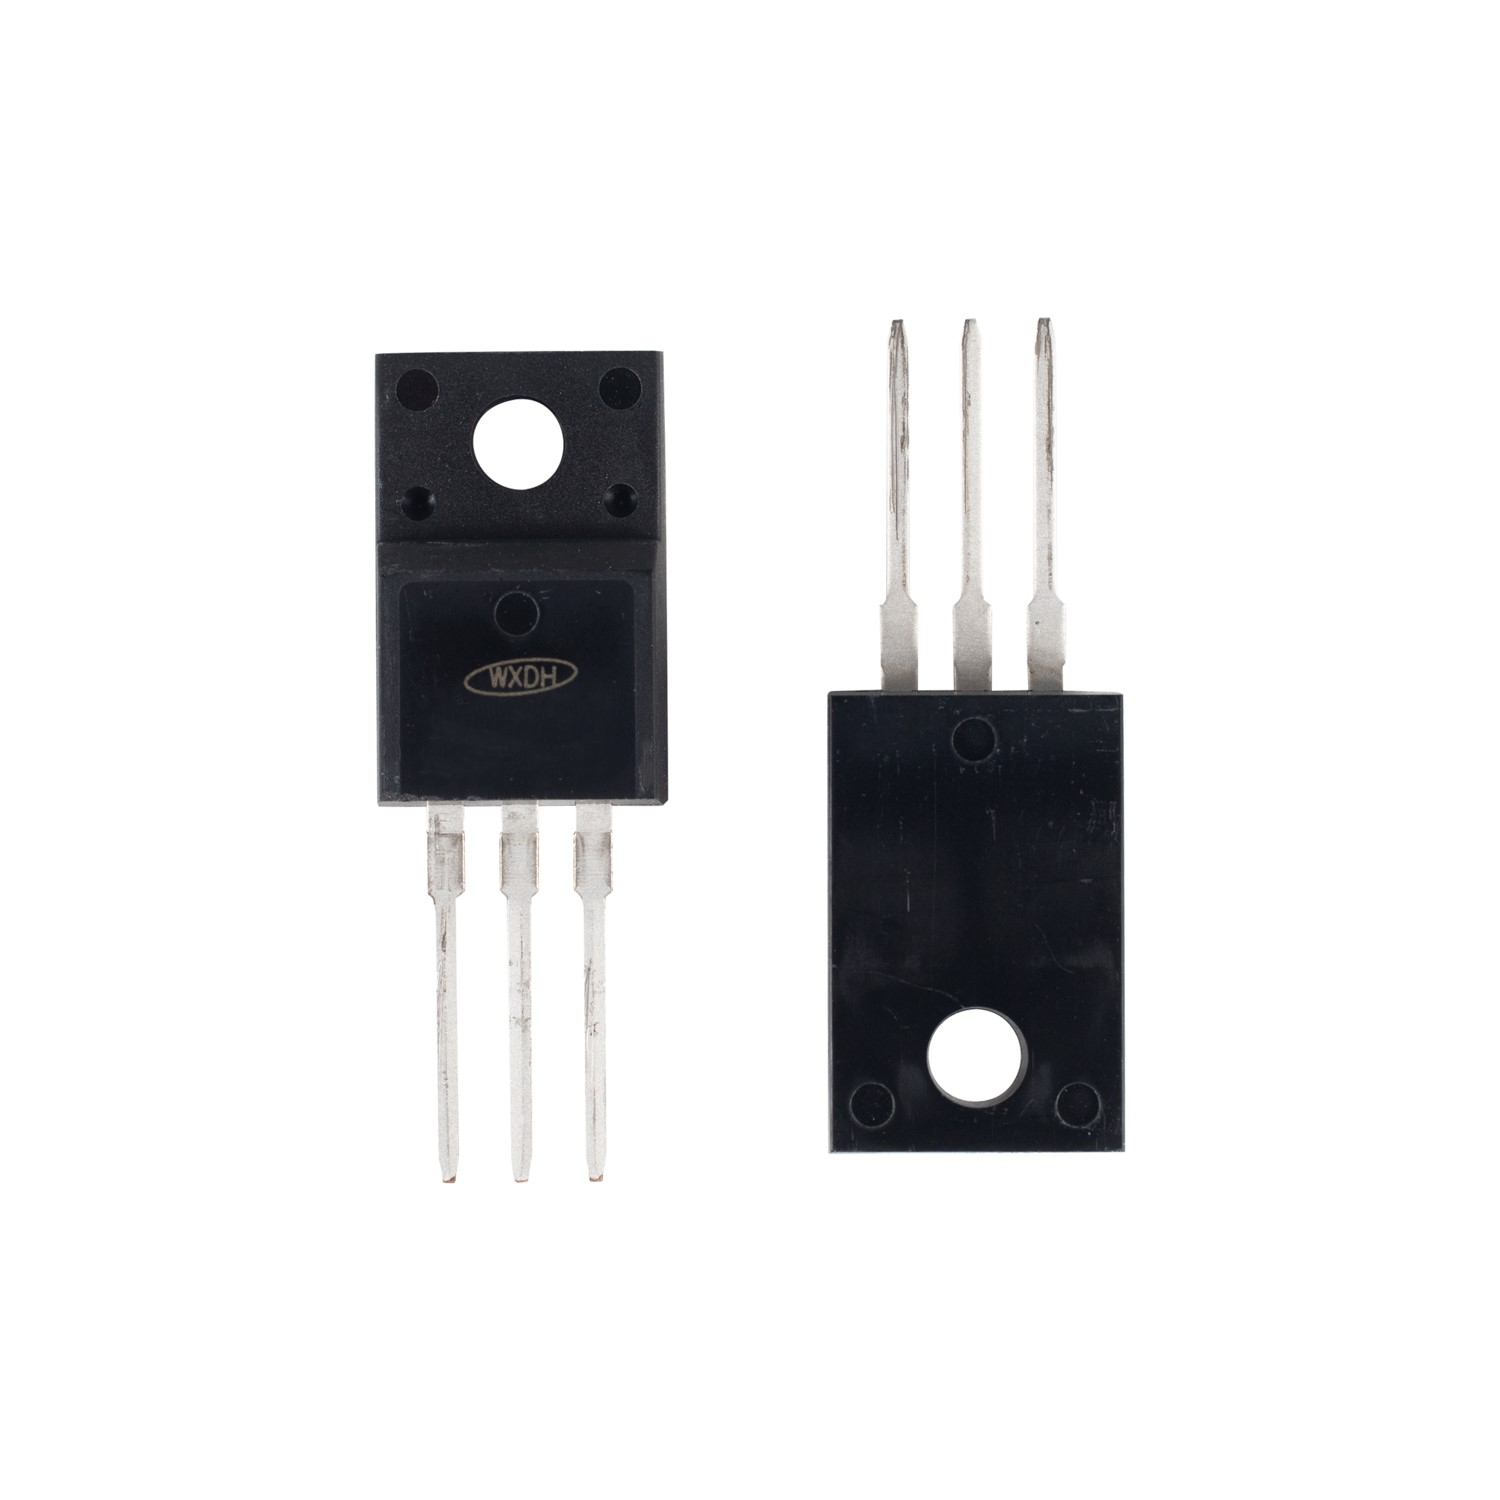 100A 100V N-channel Enhancement Mode Power MOSFET